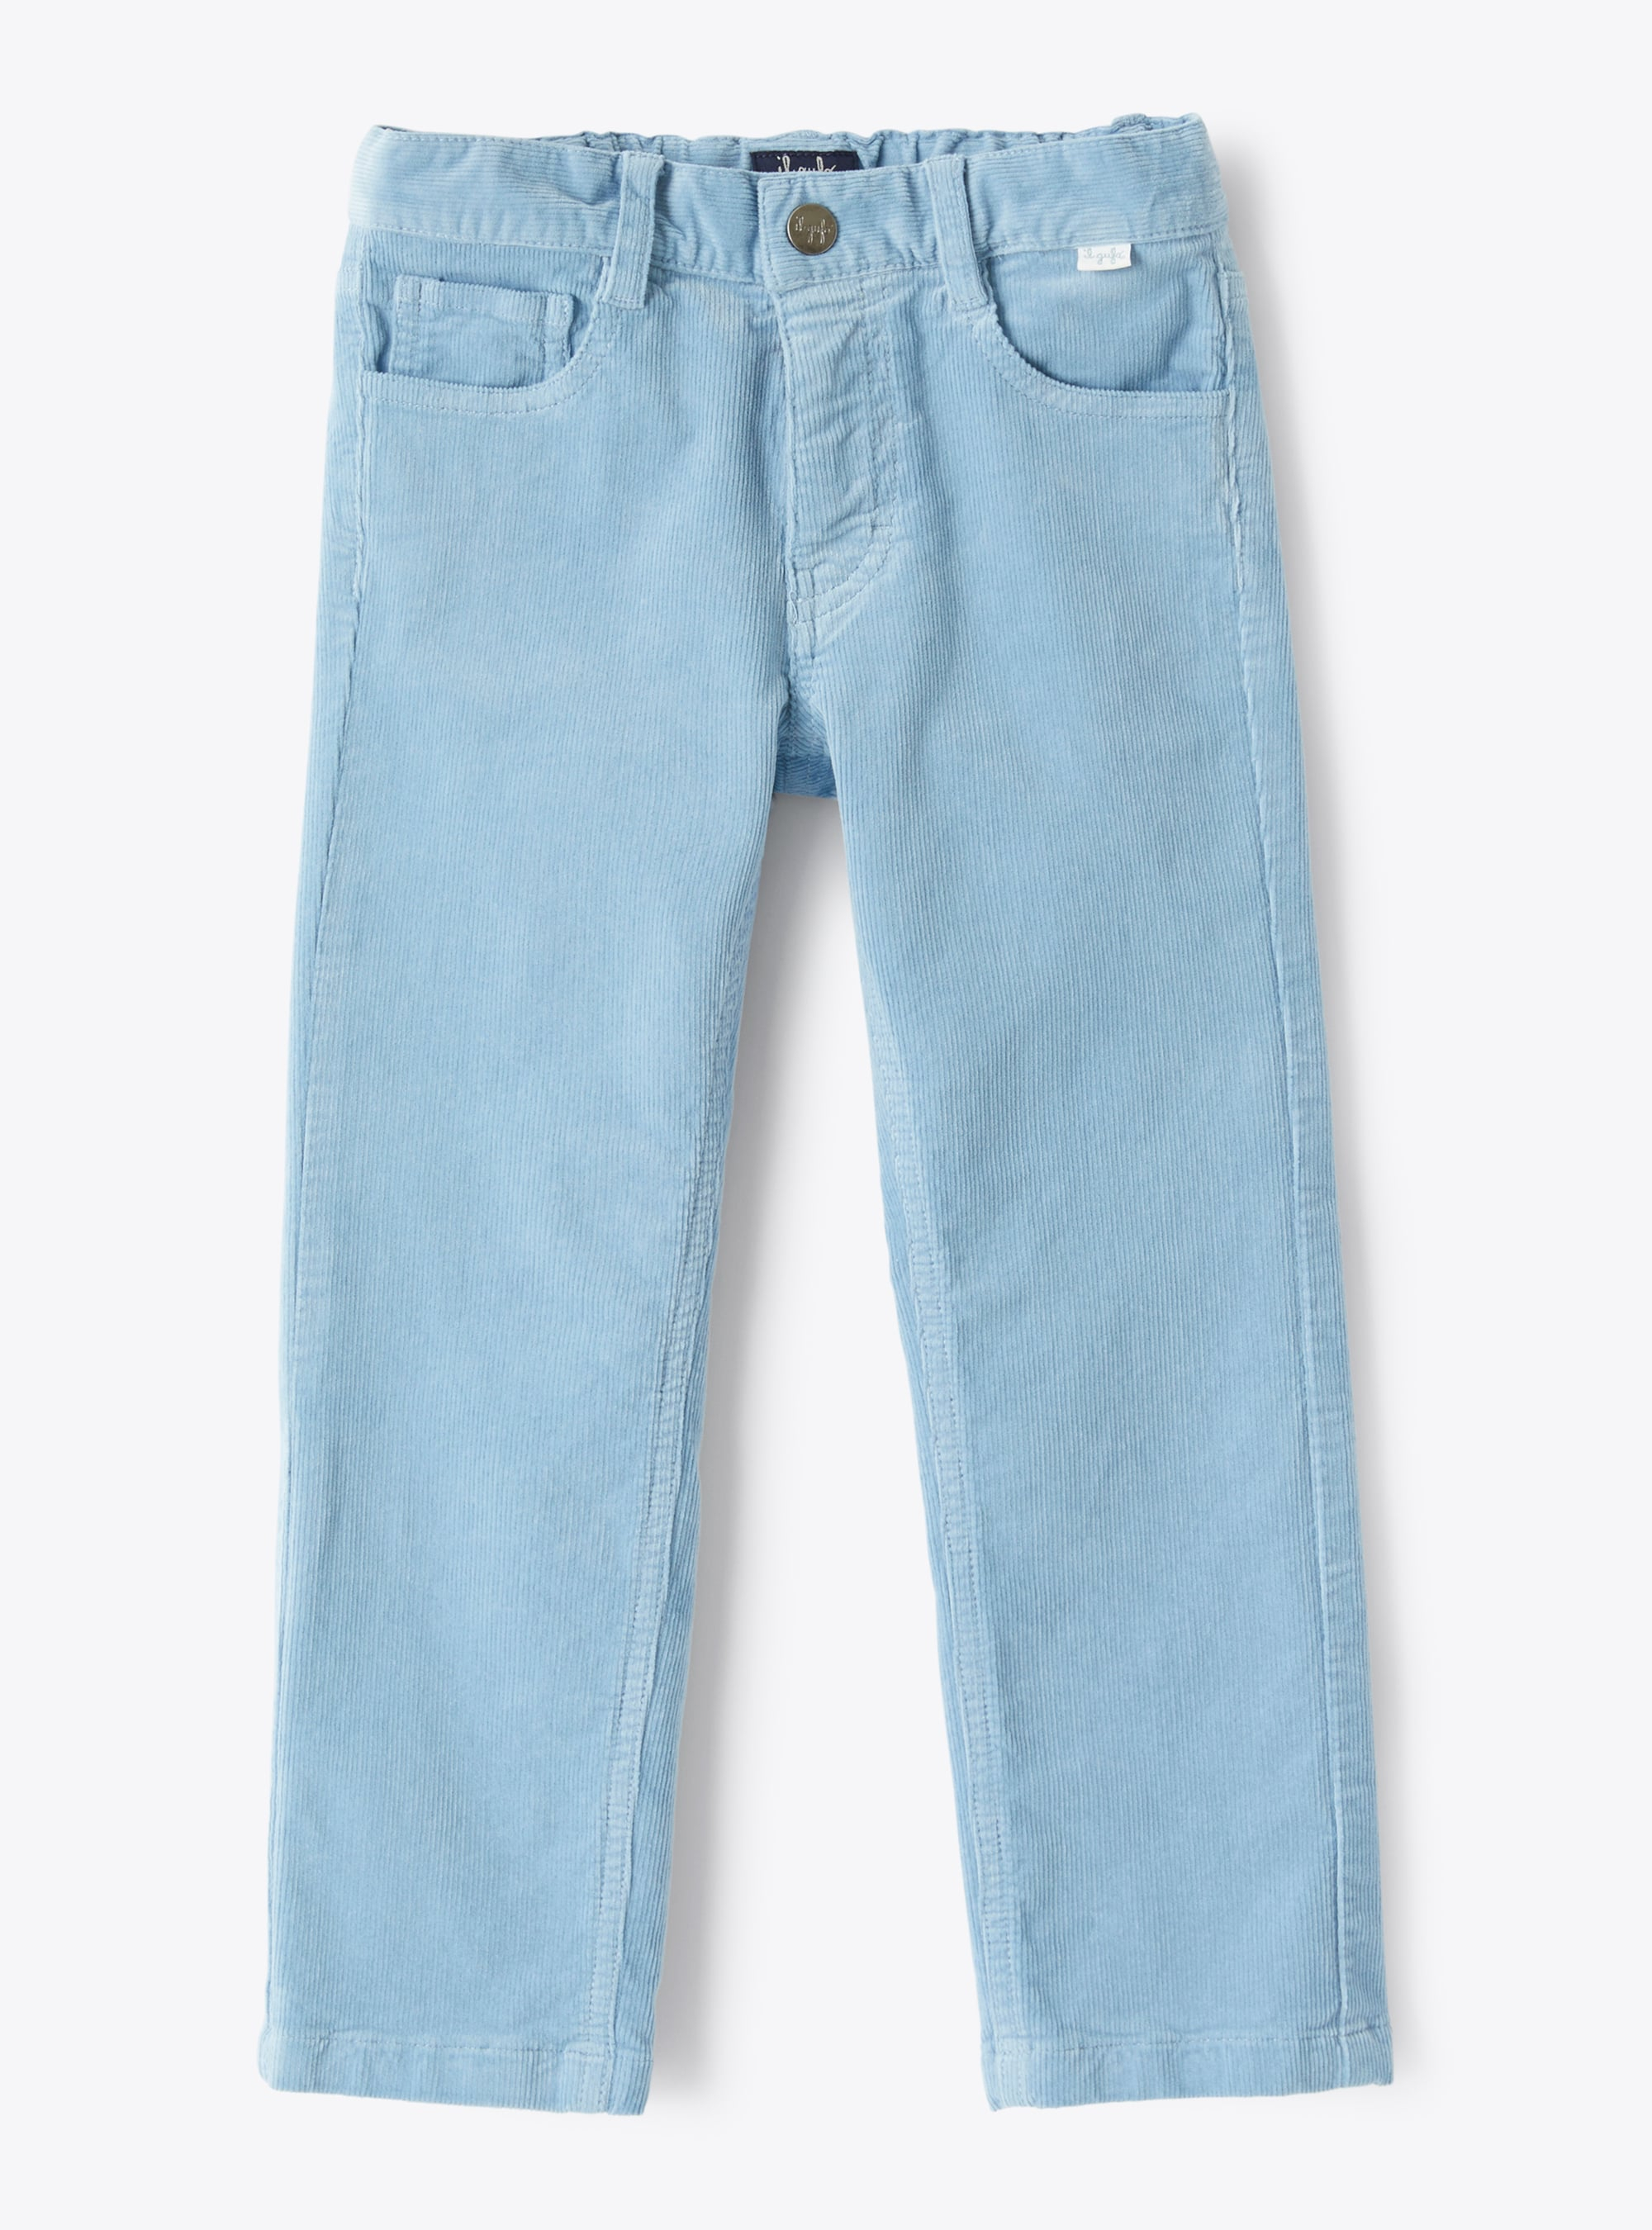 Trousers in light-blue corduroy - Trousers - Il Gufo